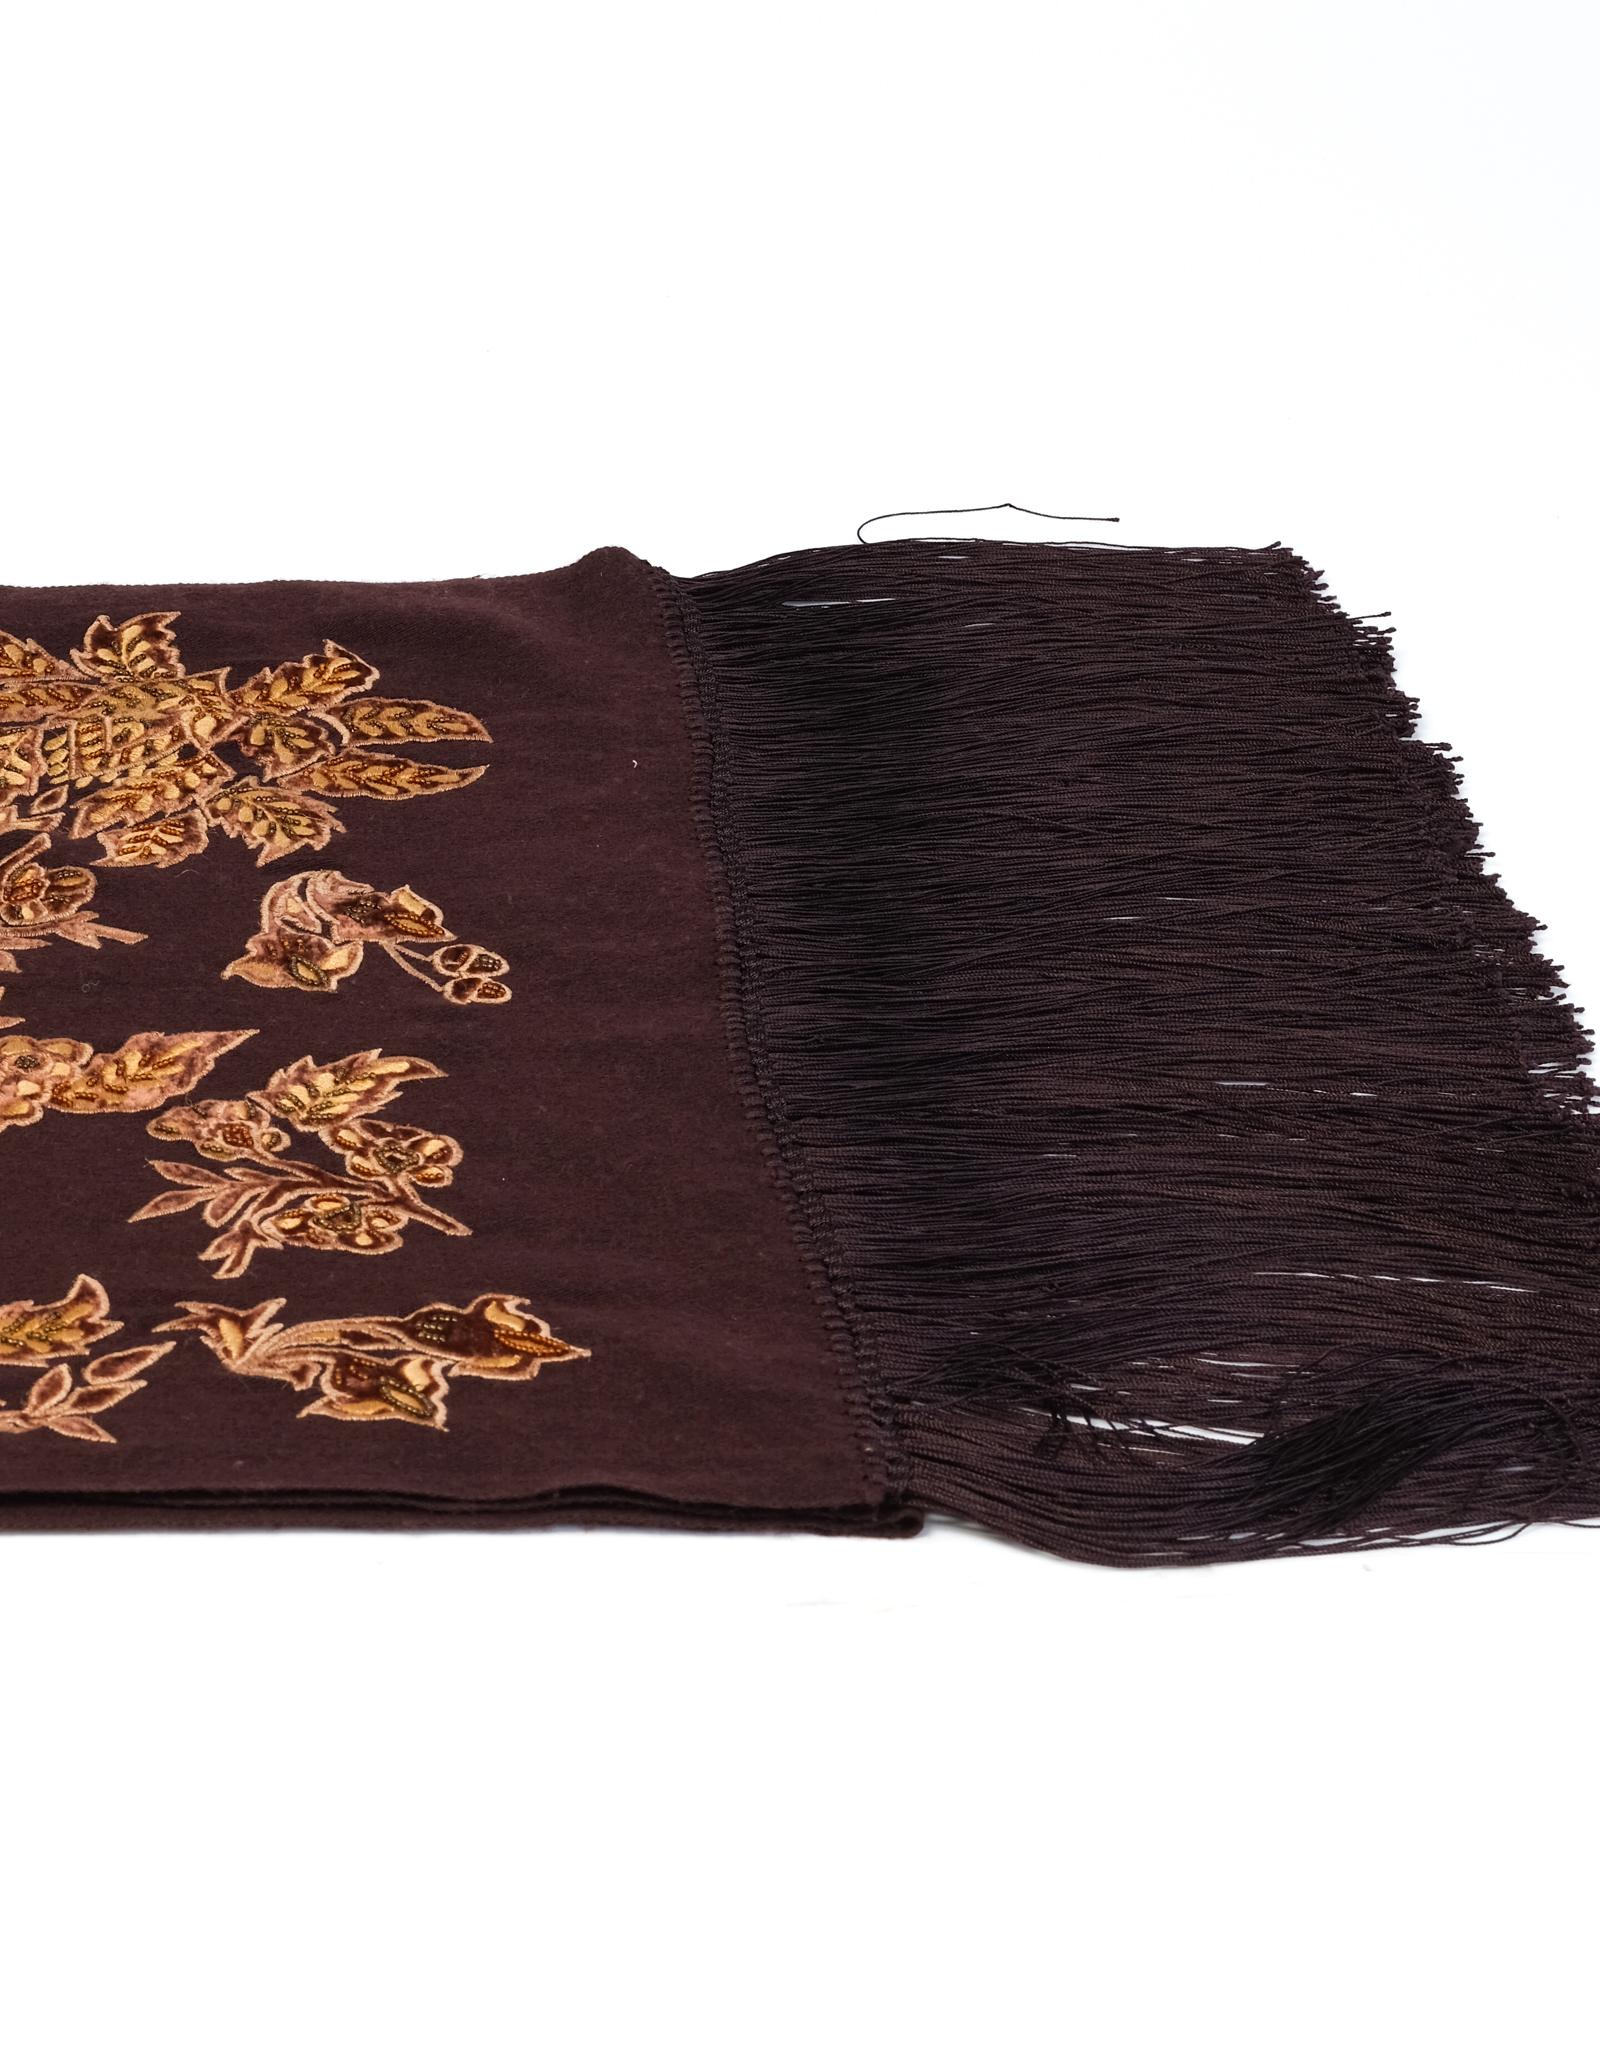 This large Burberry brown and gold stole is made of a cashmere/silk blend and embroidered with blooming flowers. 

COLOR: brown/gold
MATERIAL: 70% cashmere 30% silk
MEASUREMENTS: L 73” x W 21”
CONDITION:	Great condition - stole shows some fuzzing